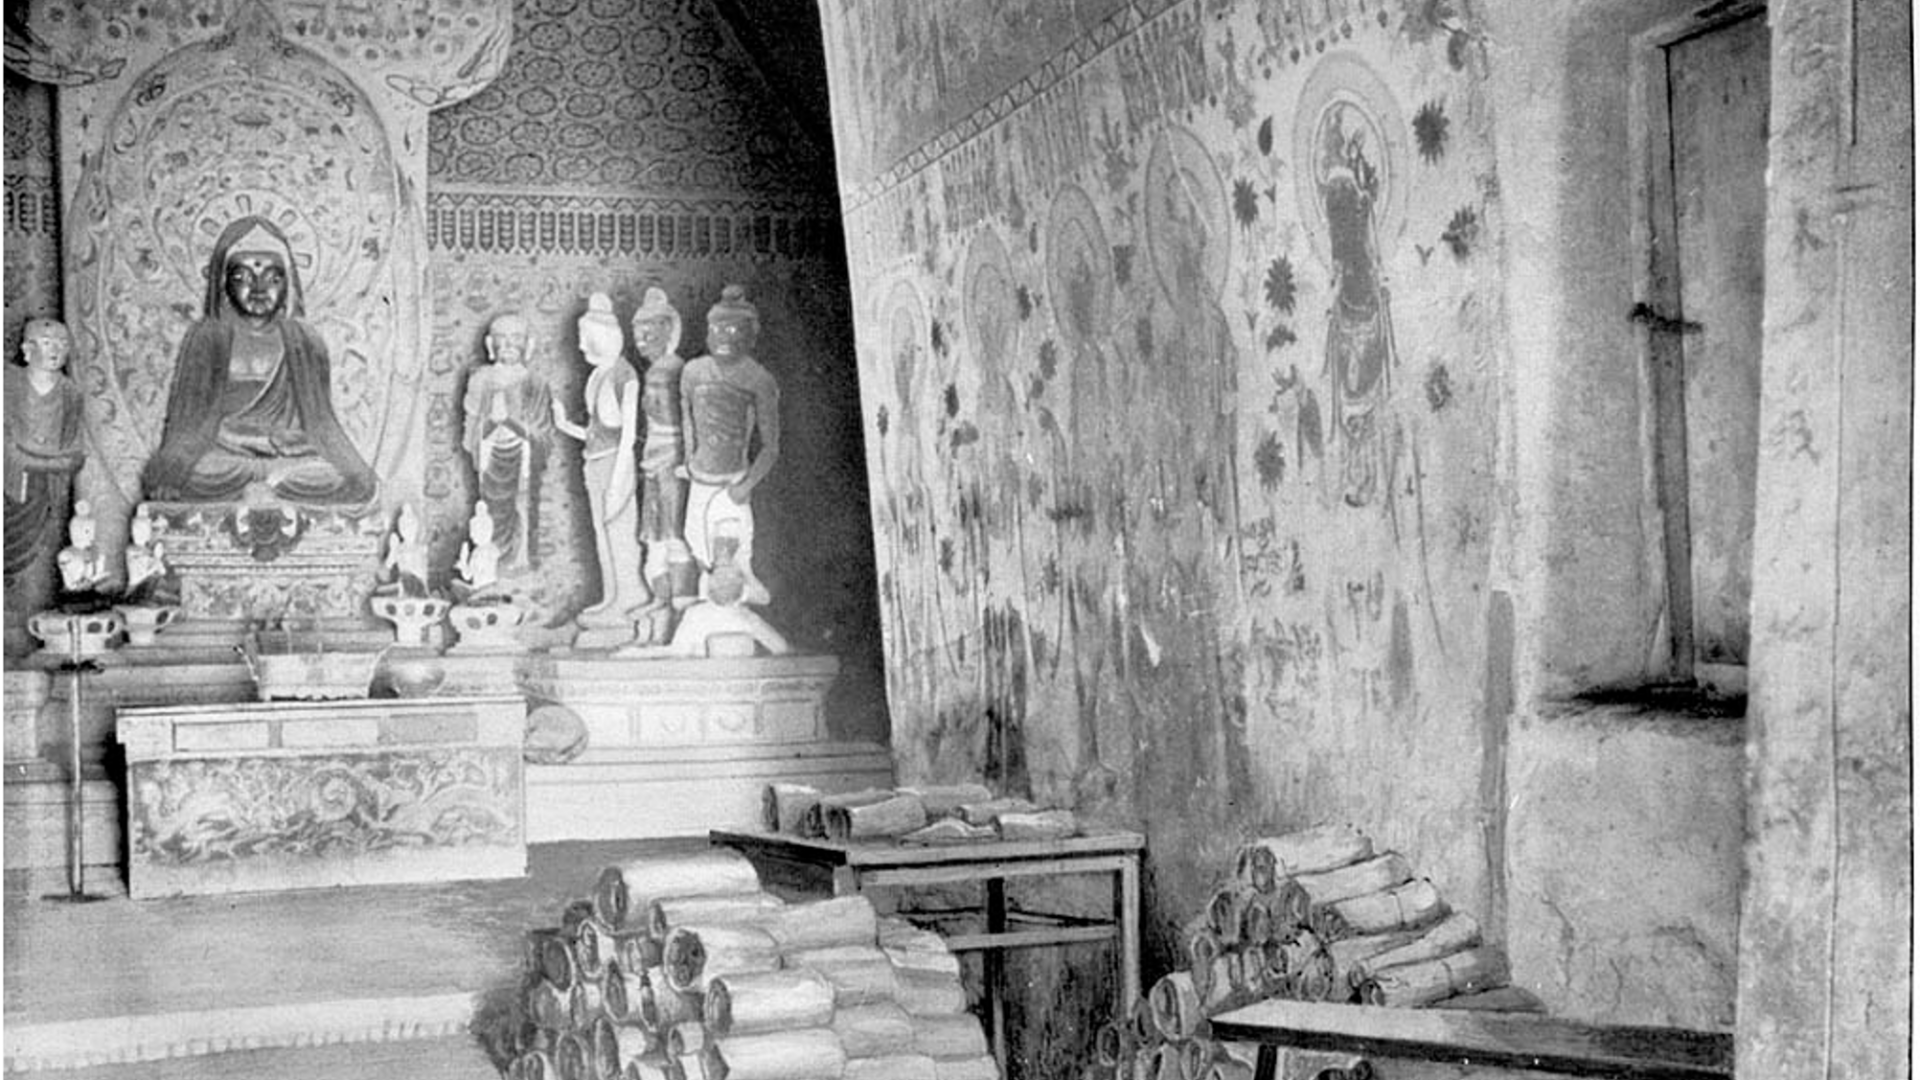 Stein's composite photograph of caves 16 and cave 17 at Dunhuang.